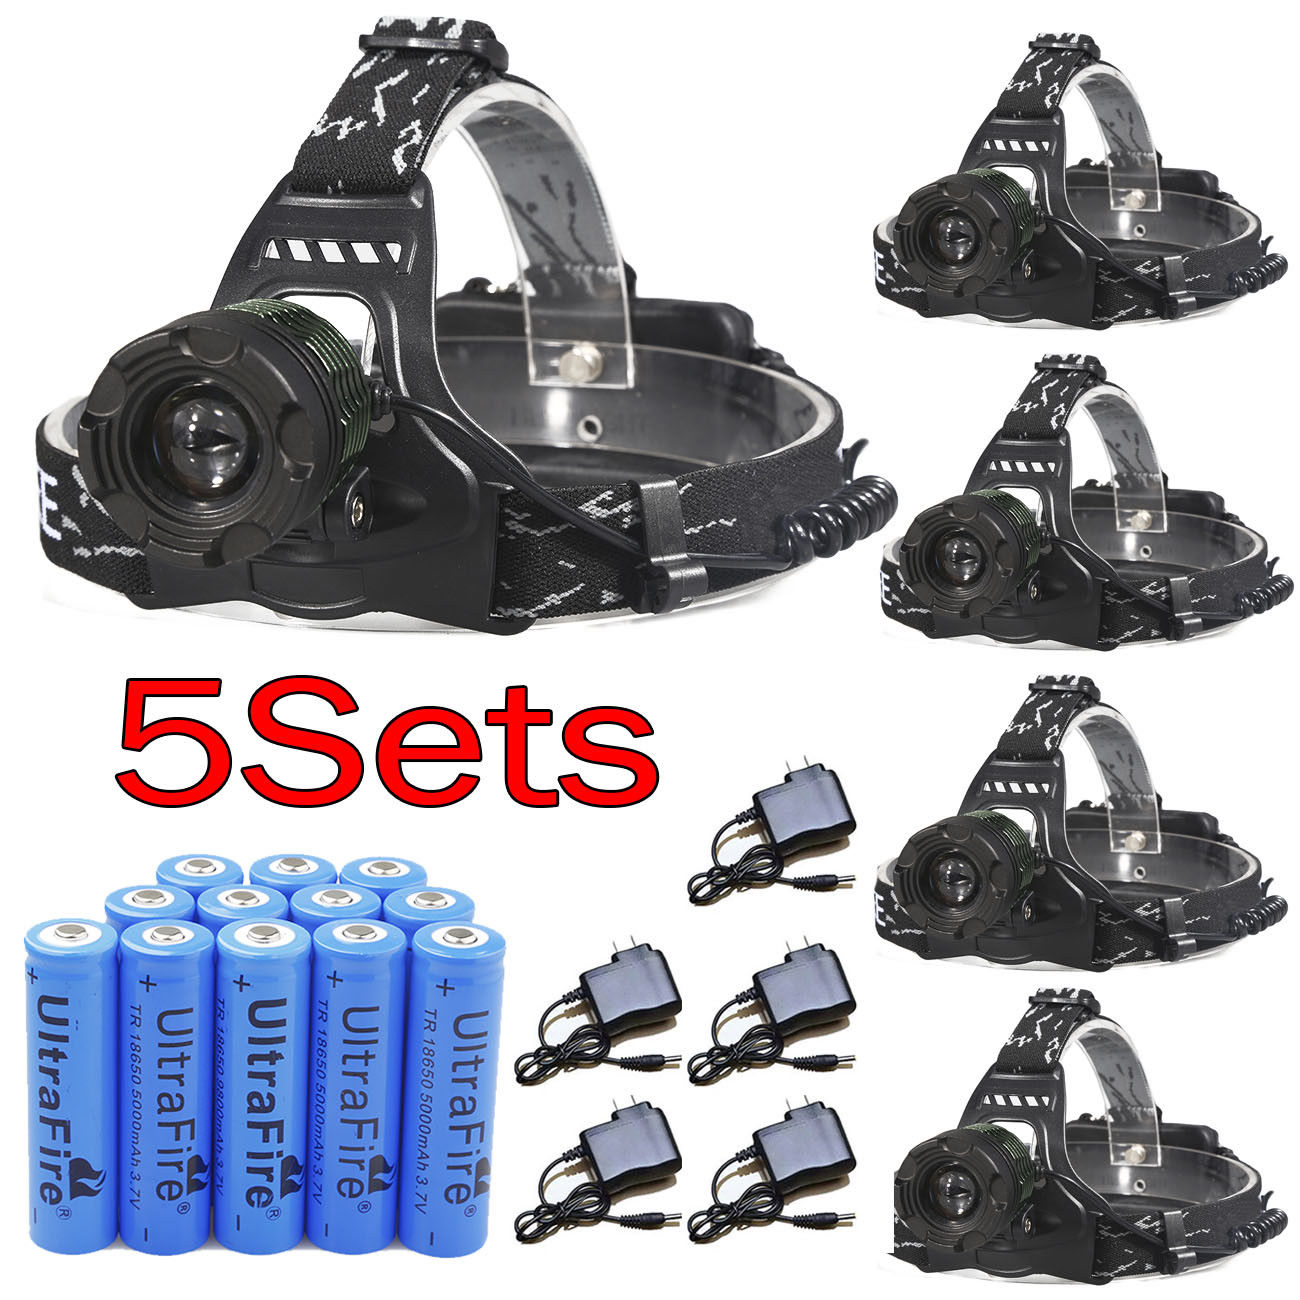 90000LM LED T6 Zoomable Headlamp LED Headlight Flashlight +Charger